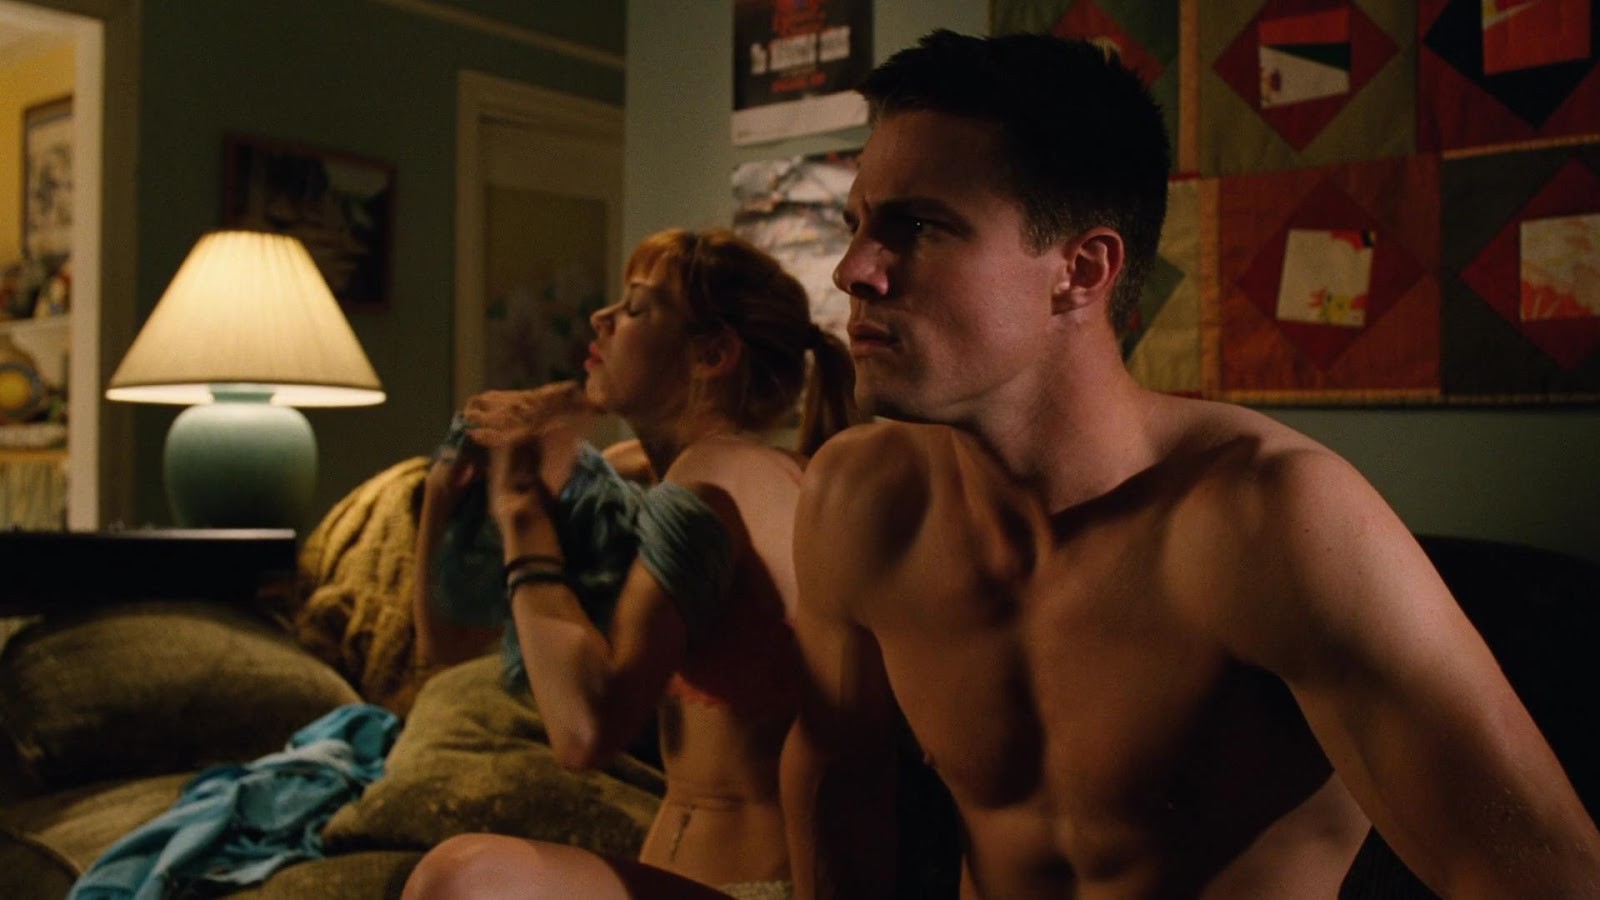 Stephen Amell in "Hung" (Ep. 